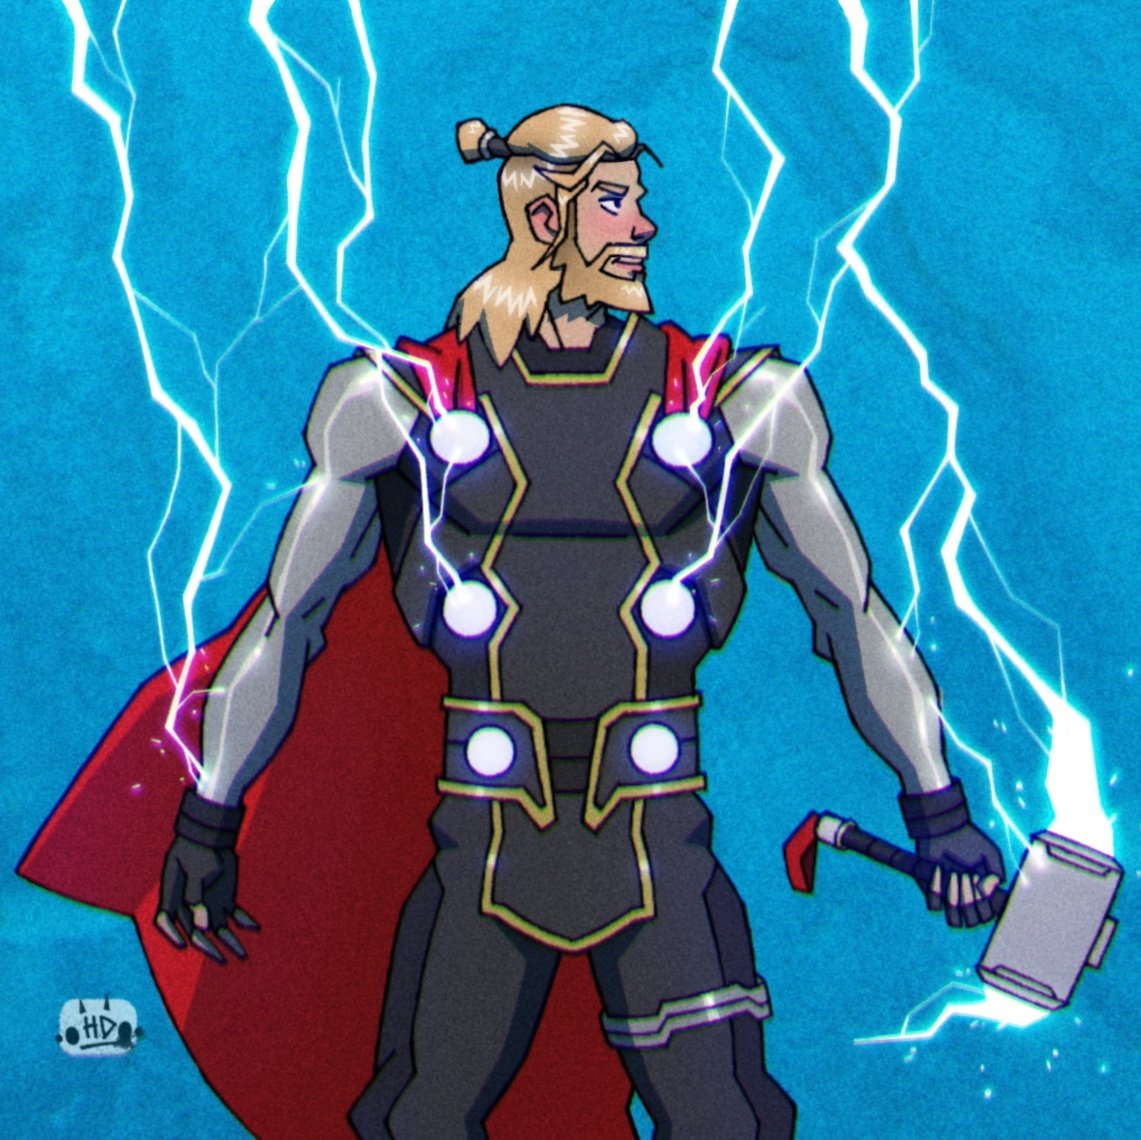 - Thor -
.
Redesigned Thor's suit for fun.
.
I know I know, the 